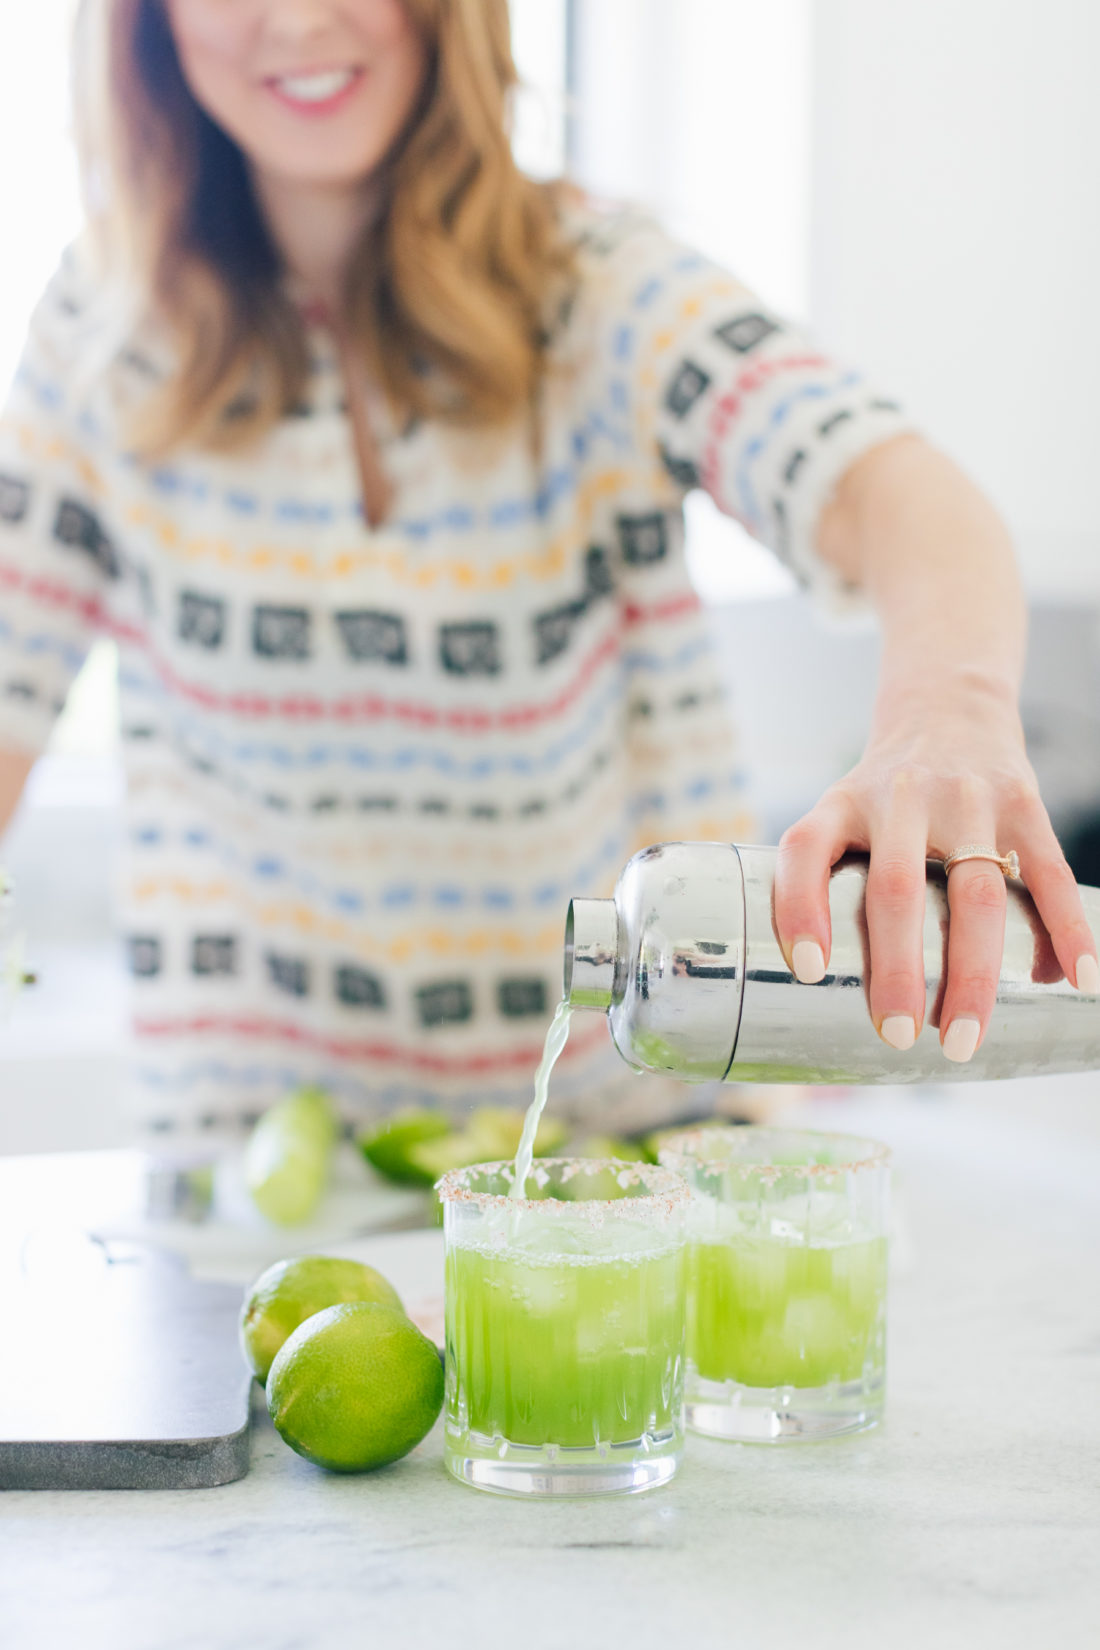 Eva Amurri Martino of Happily Eva After pours cucumber margaritas into a glass at her home in Connecticut